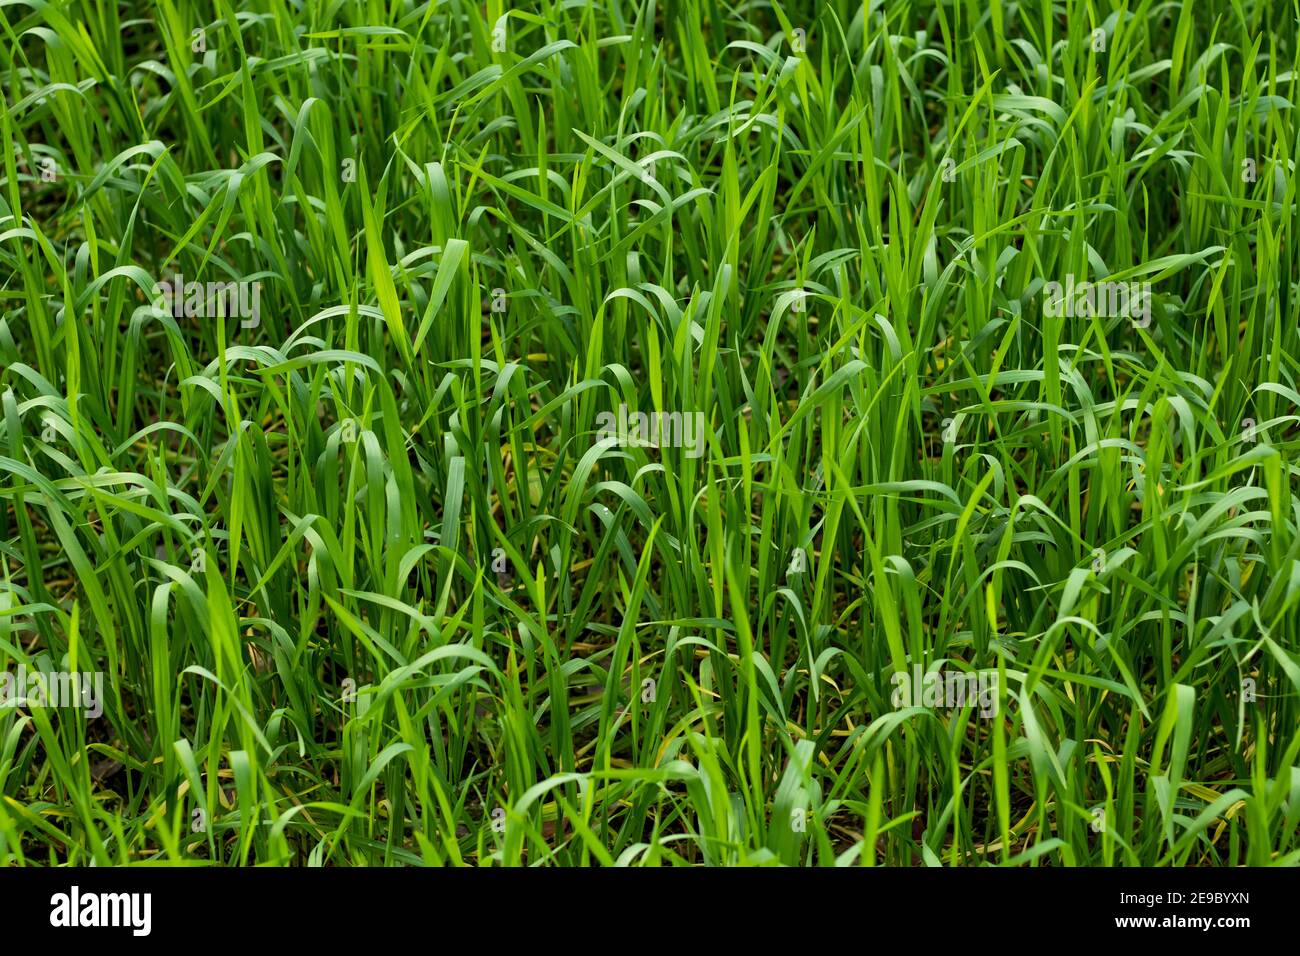 Preferred Scientific Name is wheat flour and Taxonomic green and yellow tree Stock Photo